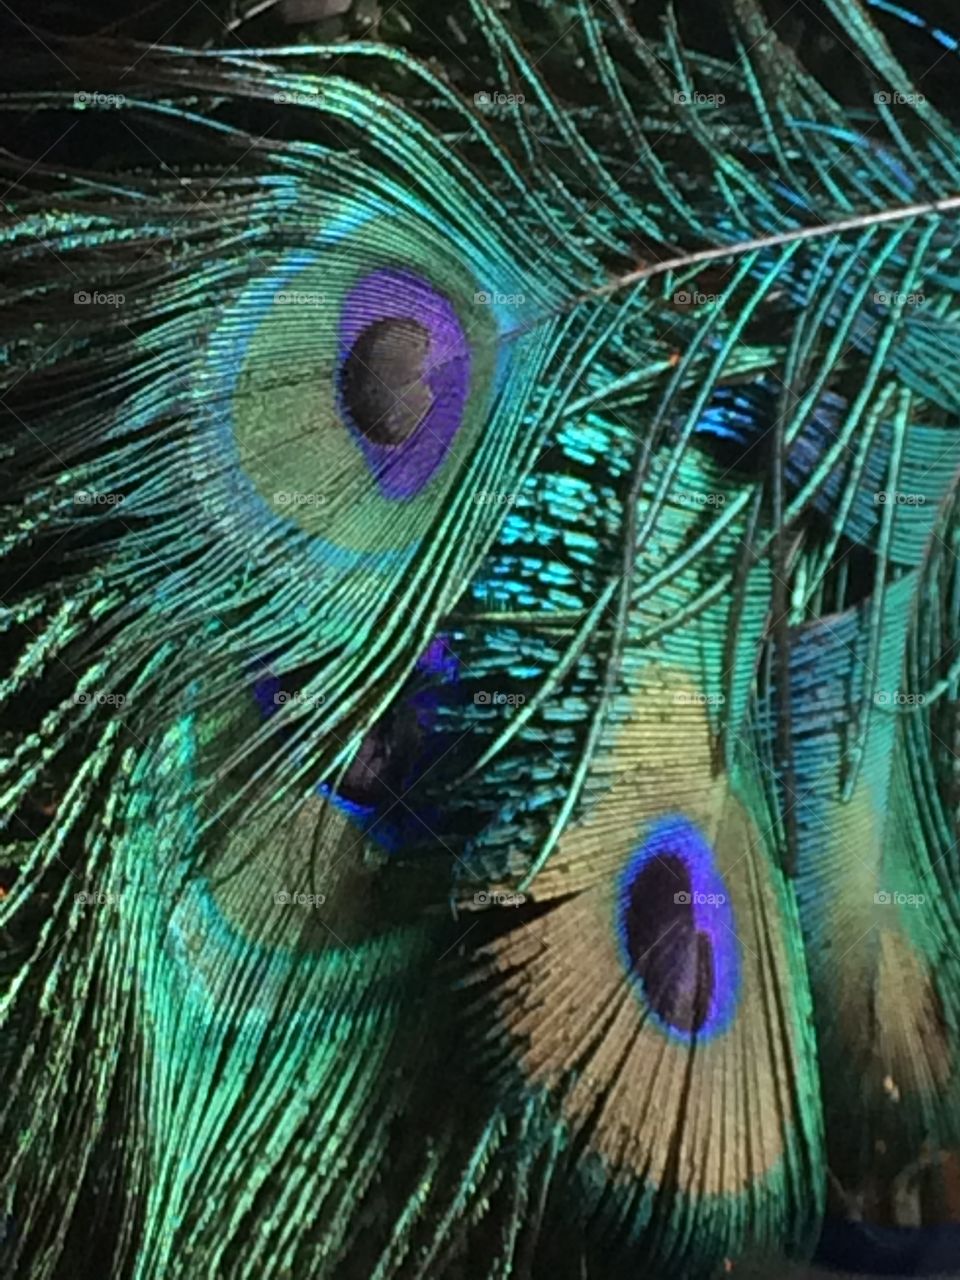 Peacock feathers close up 